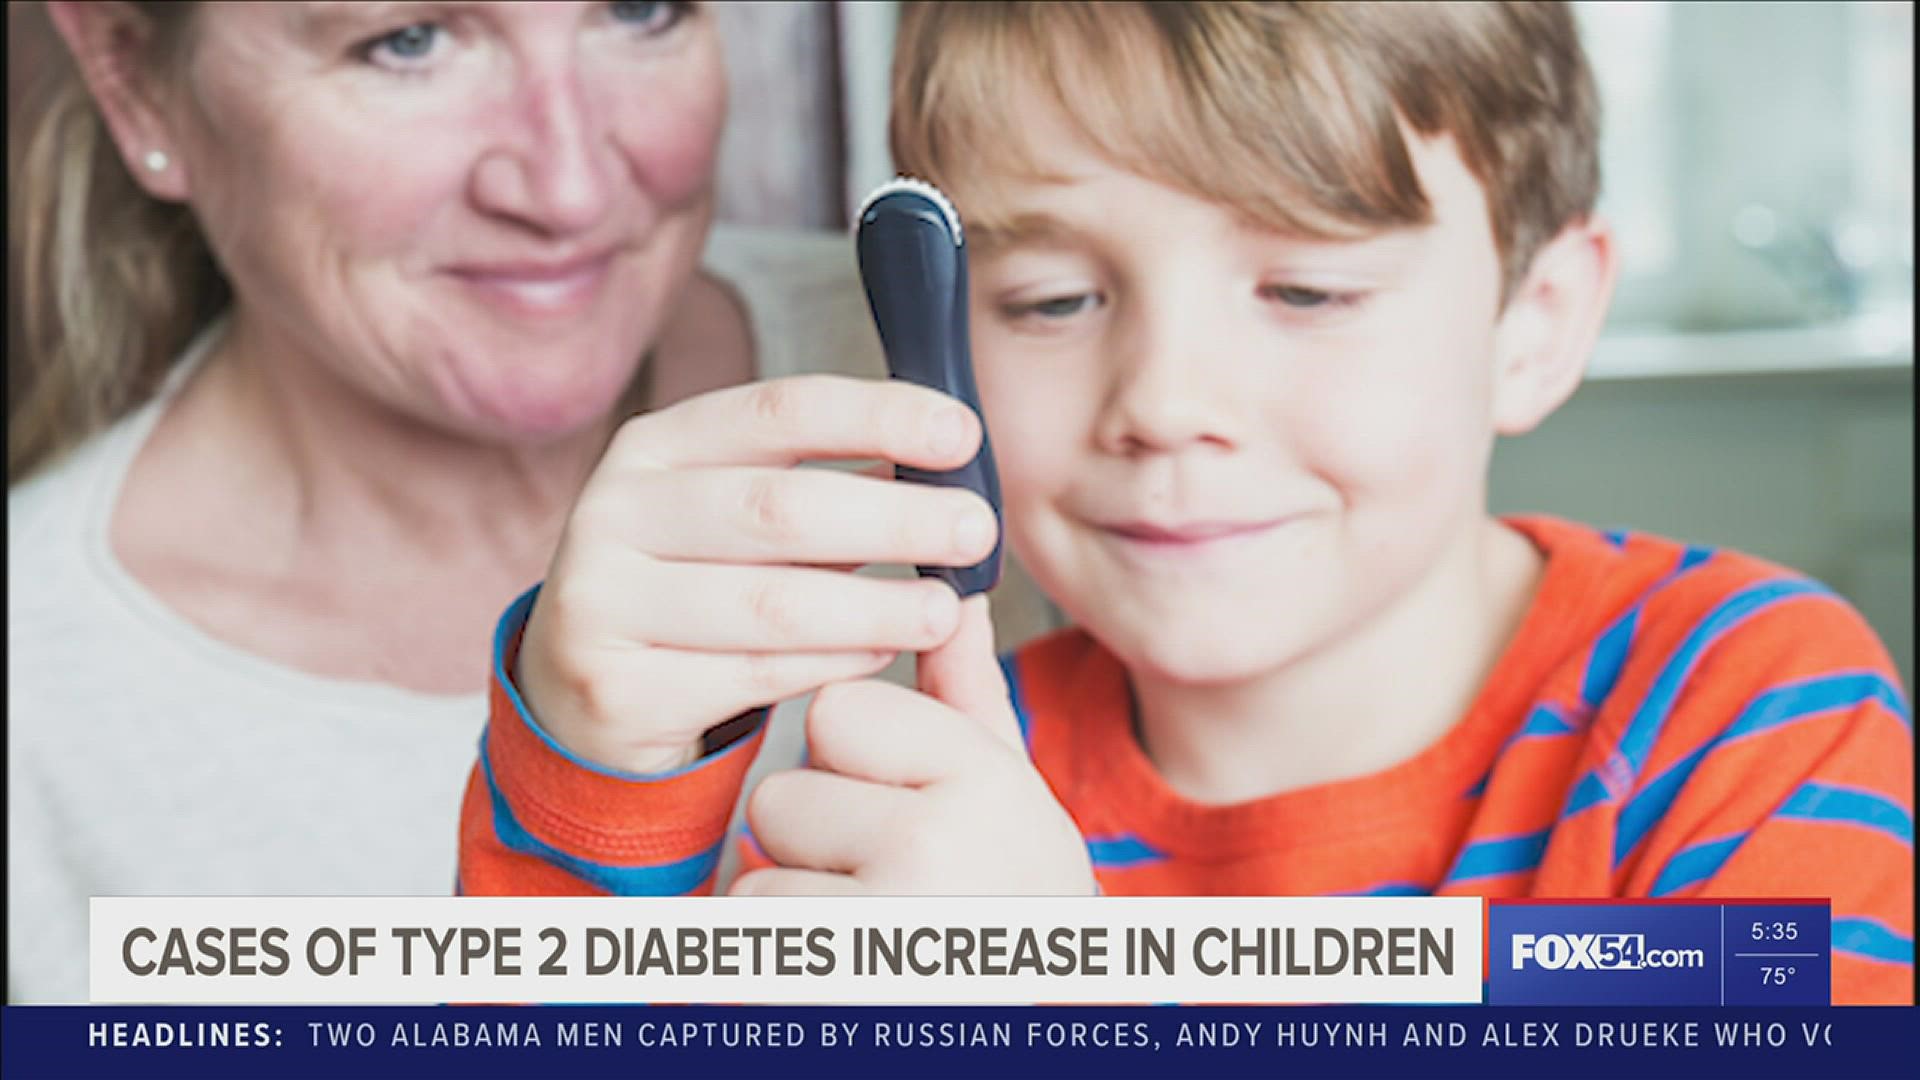 Knowing the risk factors for Type II diabetes may help prevent it in children.